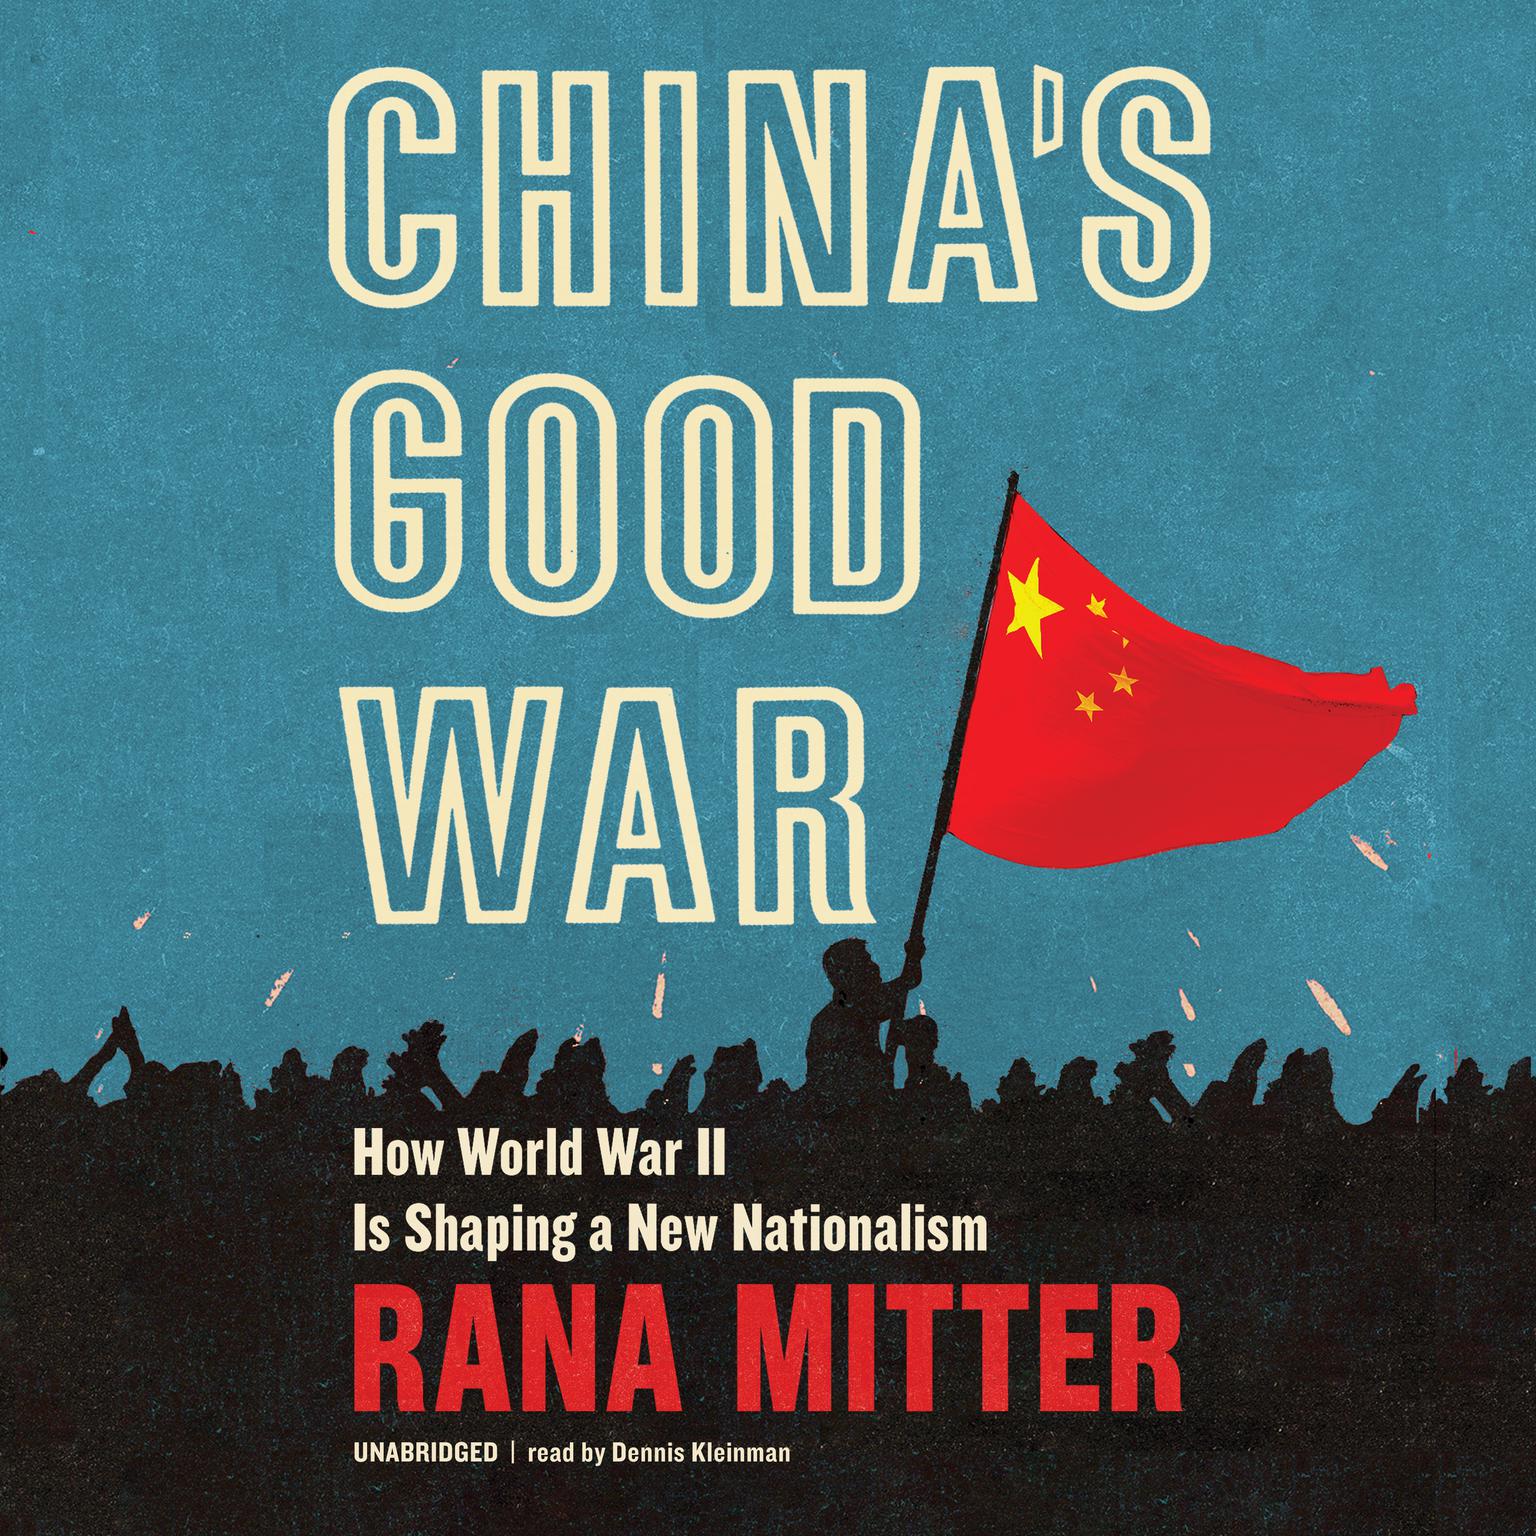 China’s Good War: How World War II Is Shaping a New Nationalism  Audiobook, by Rana Mitter